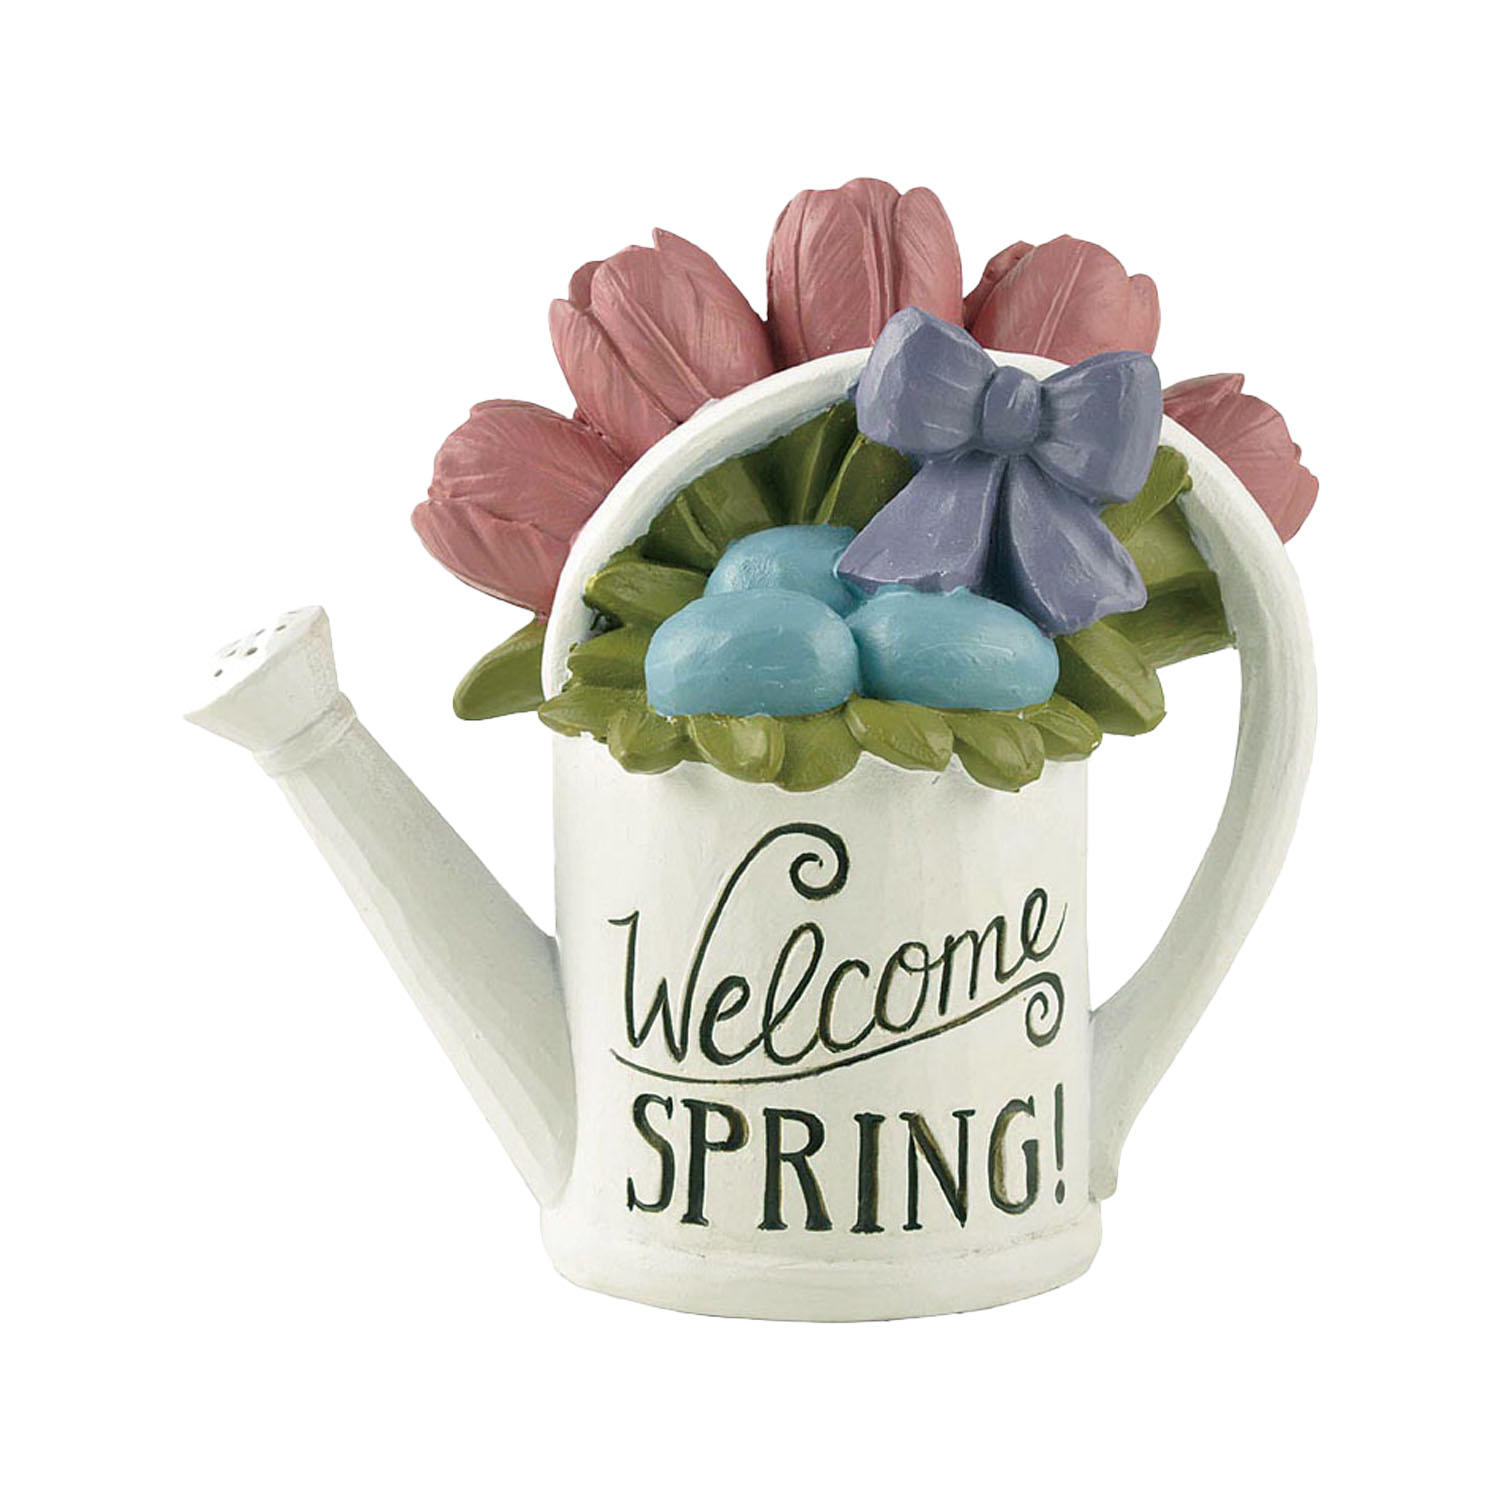 ‘Welcome SPRING’ Beautiful Flowers Watering Pot Resin Ornaments  211-12939